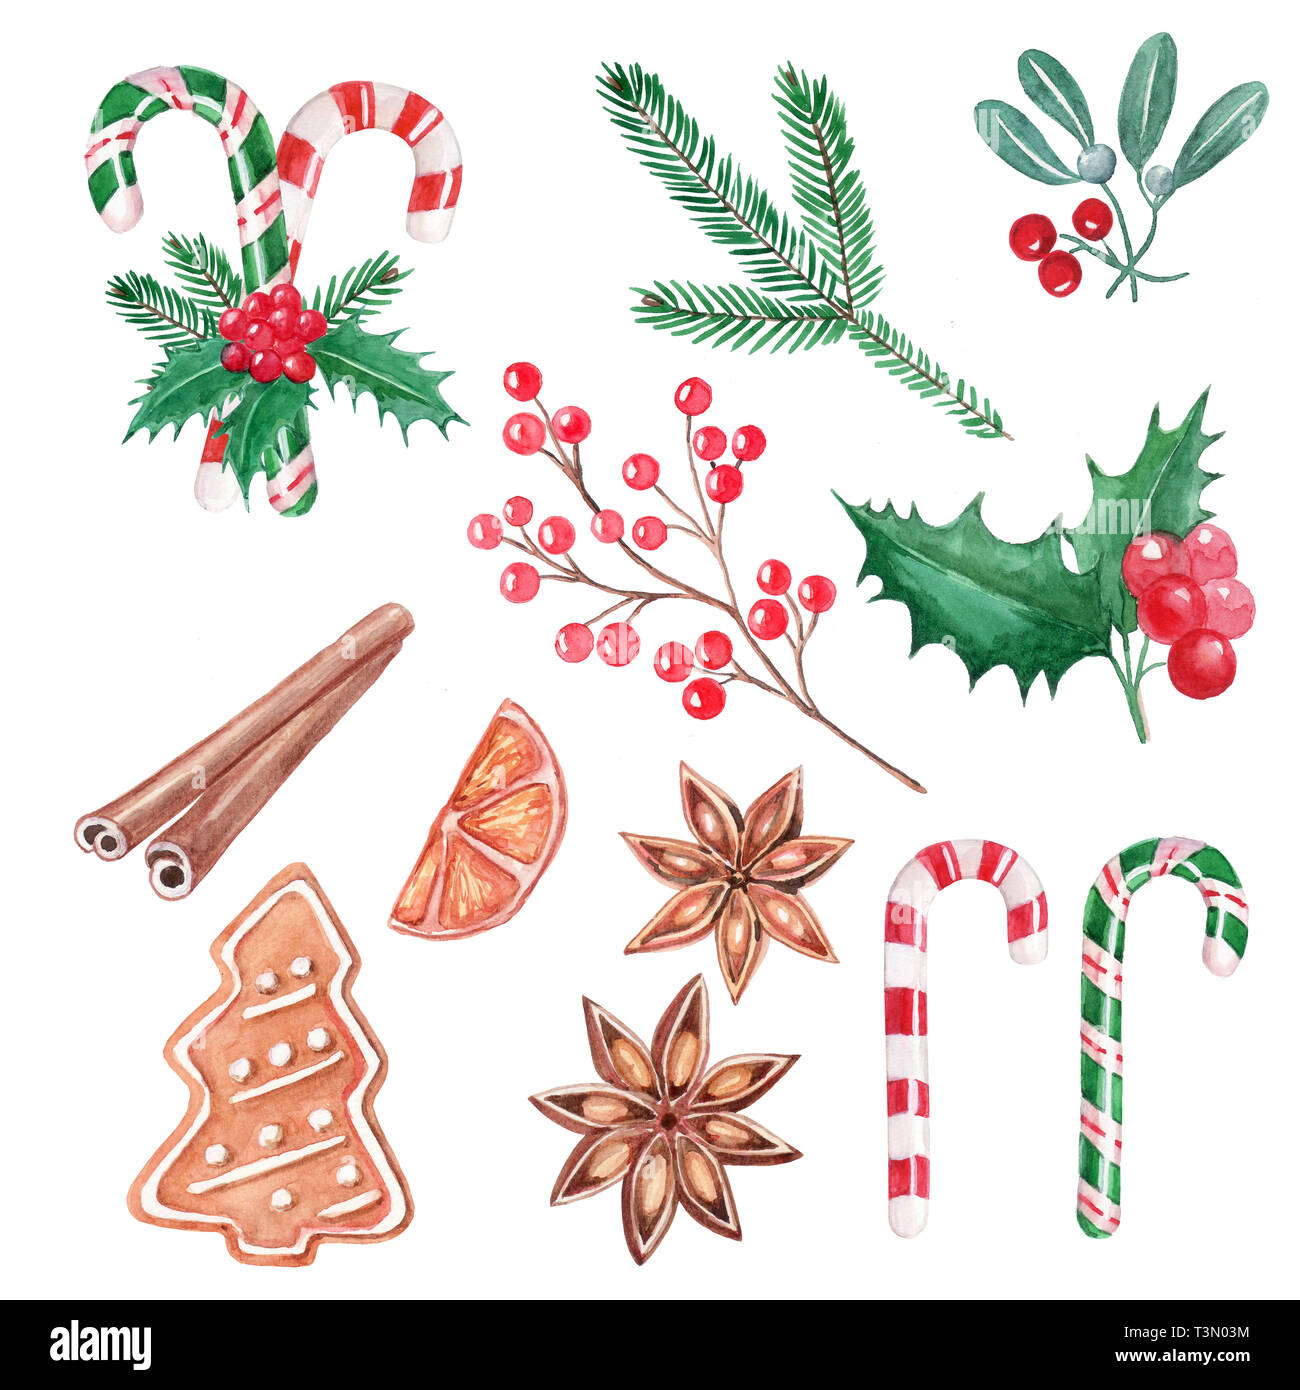 Set of Christmas elements, red berries, lollipops, holly, cinnamon, mistletoe, ginger cookie, hand drawn illustration, watercolor Stock Photo